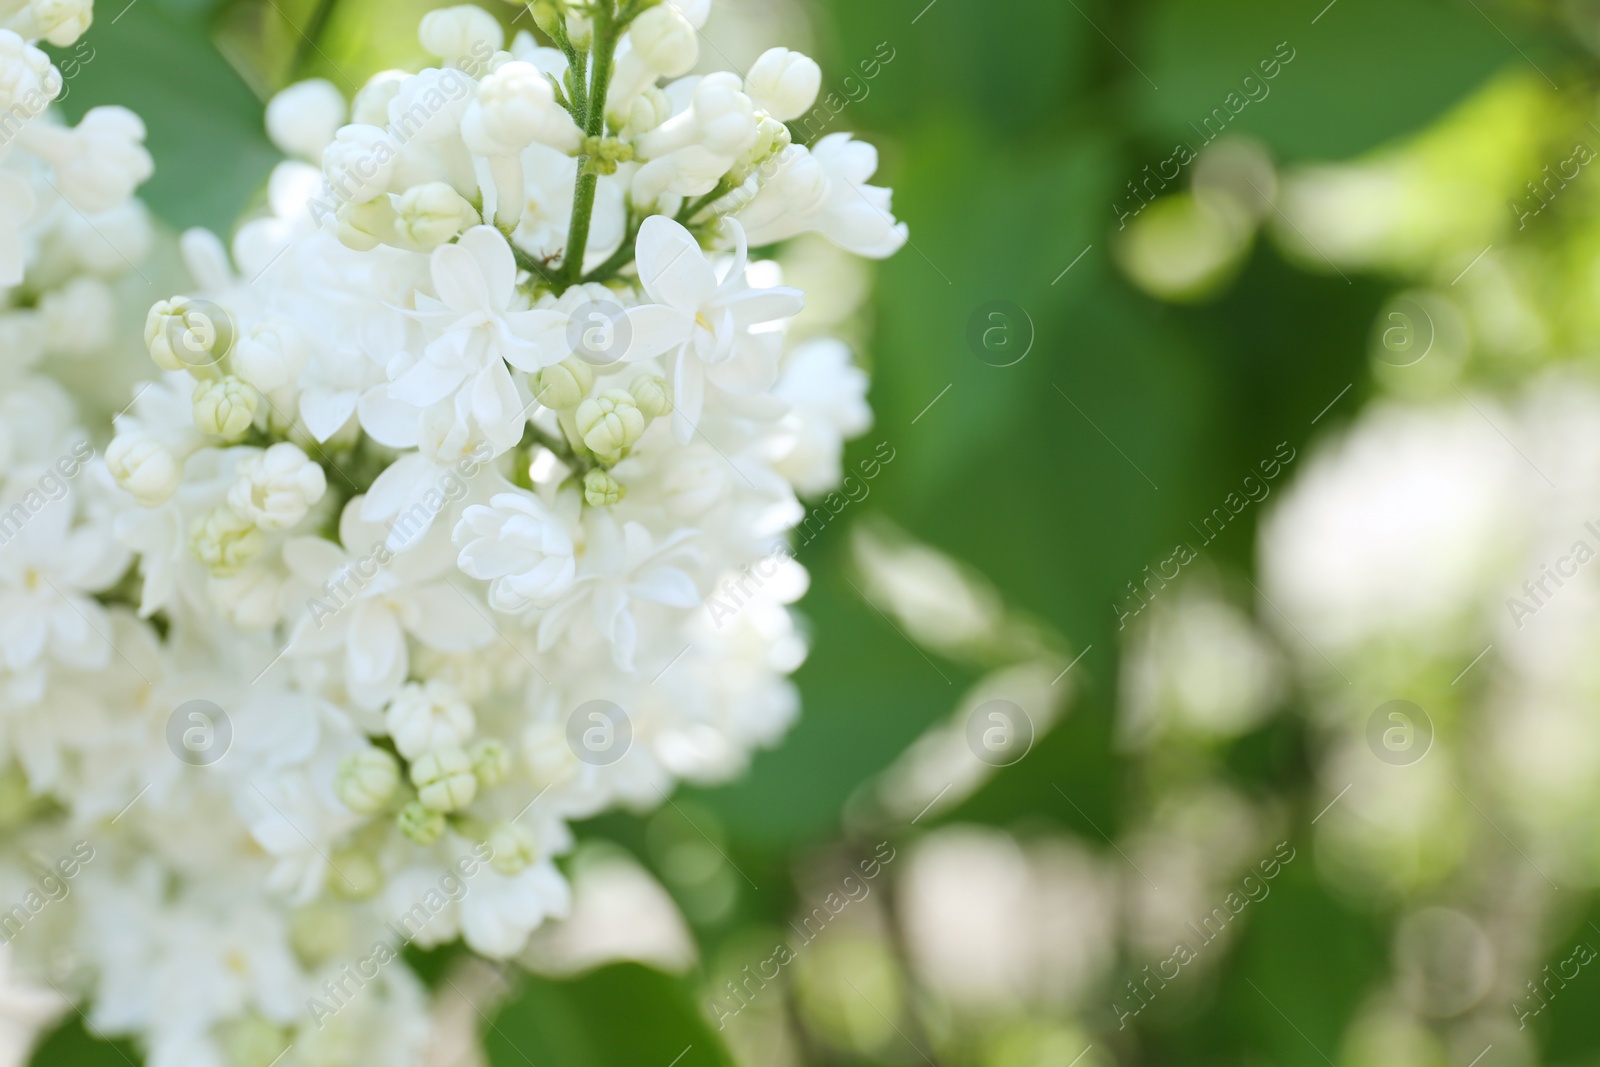 Photo of Closeup view of beautiful blooming lilac shrub with white flowers outdoors